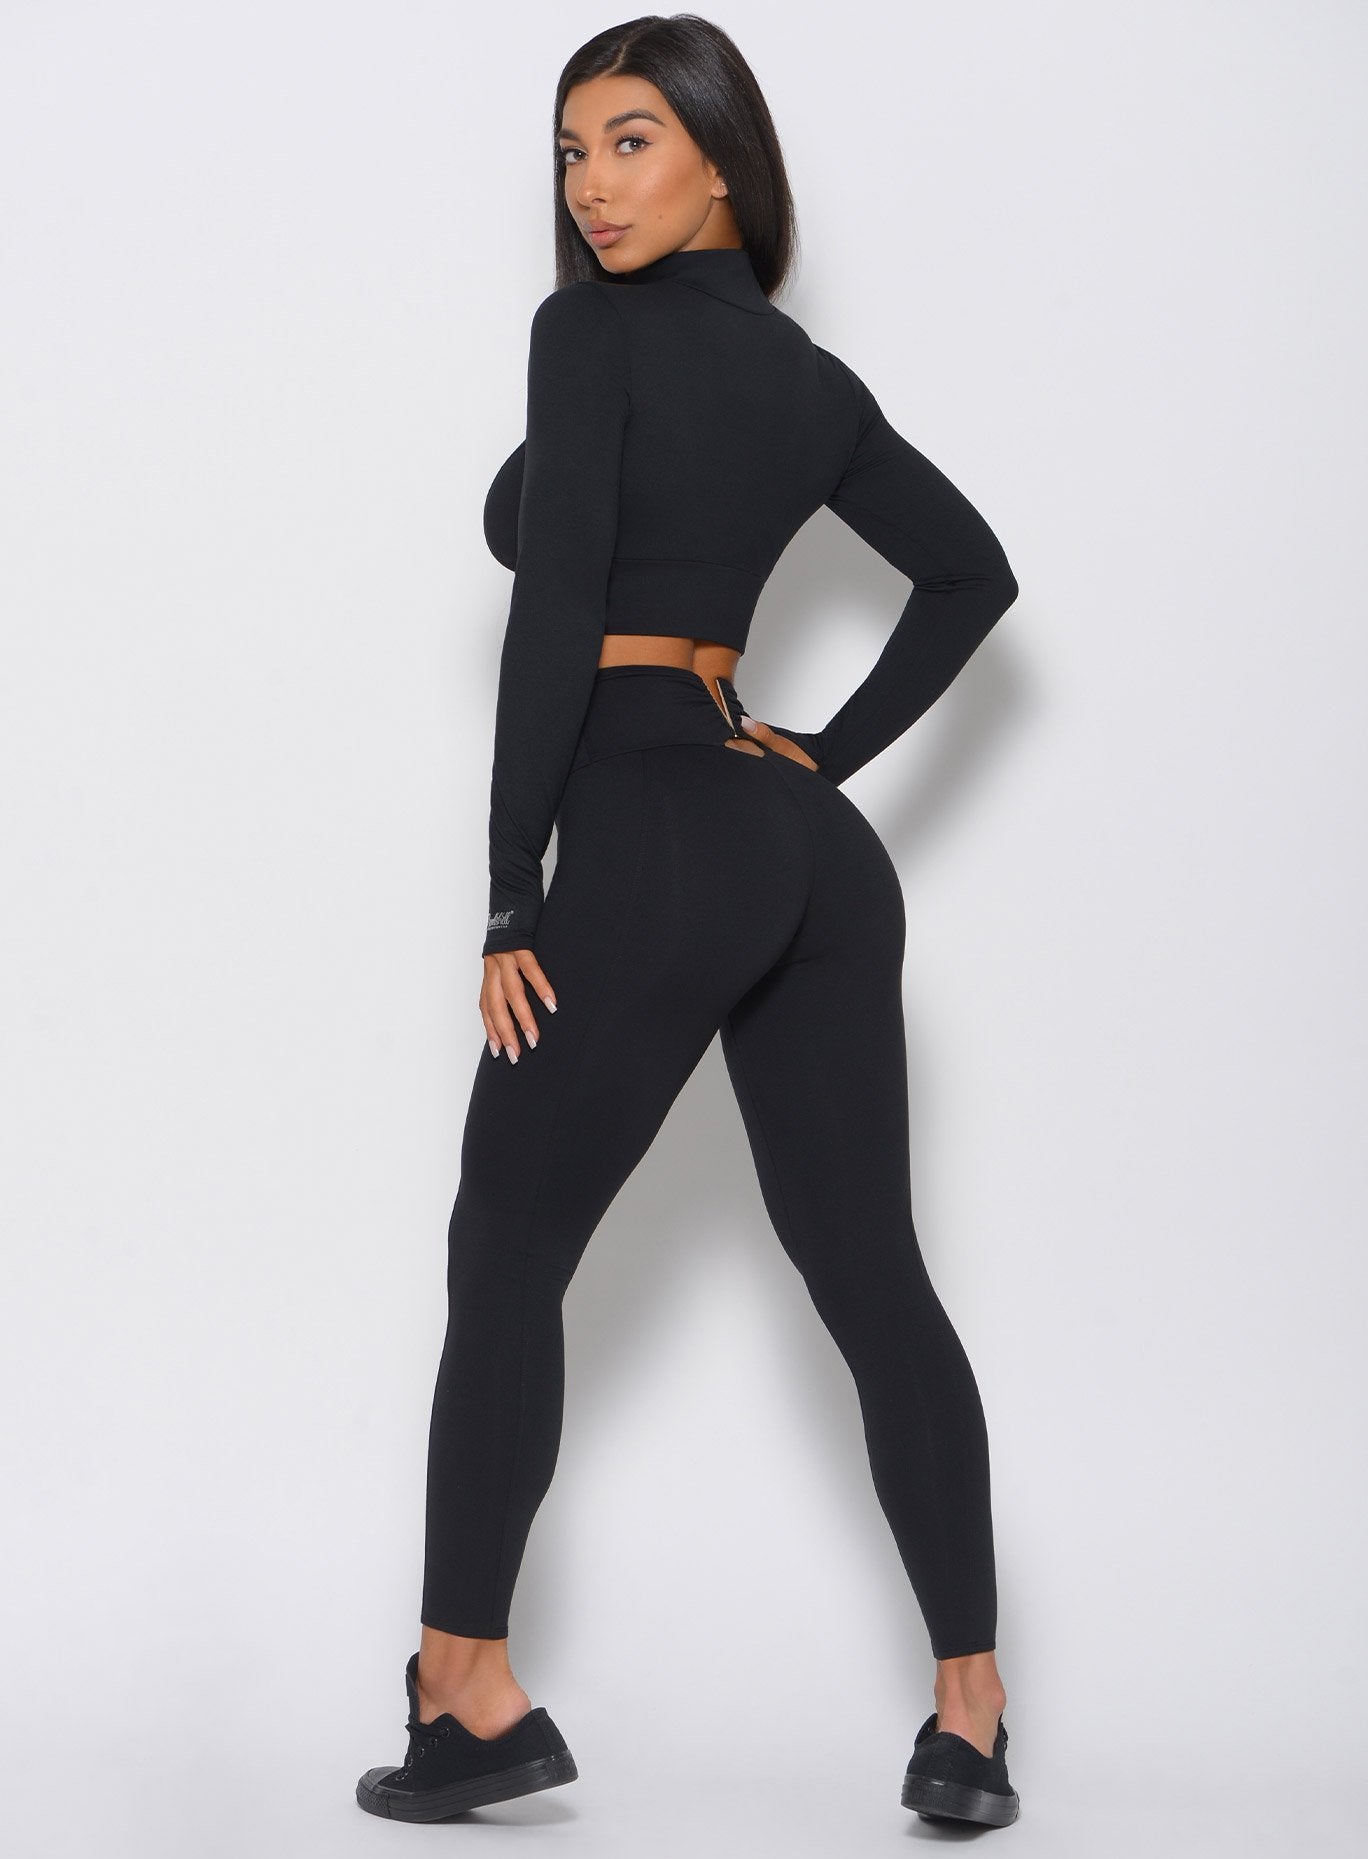 Left side view of the model in a high waist black leggings with a V back design